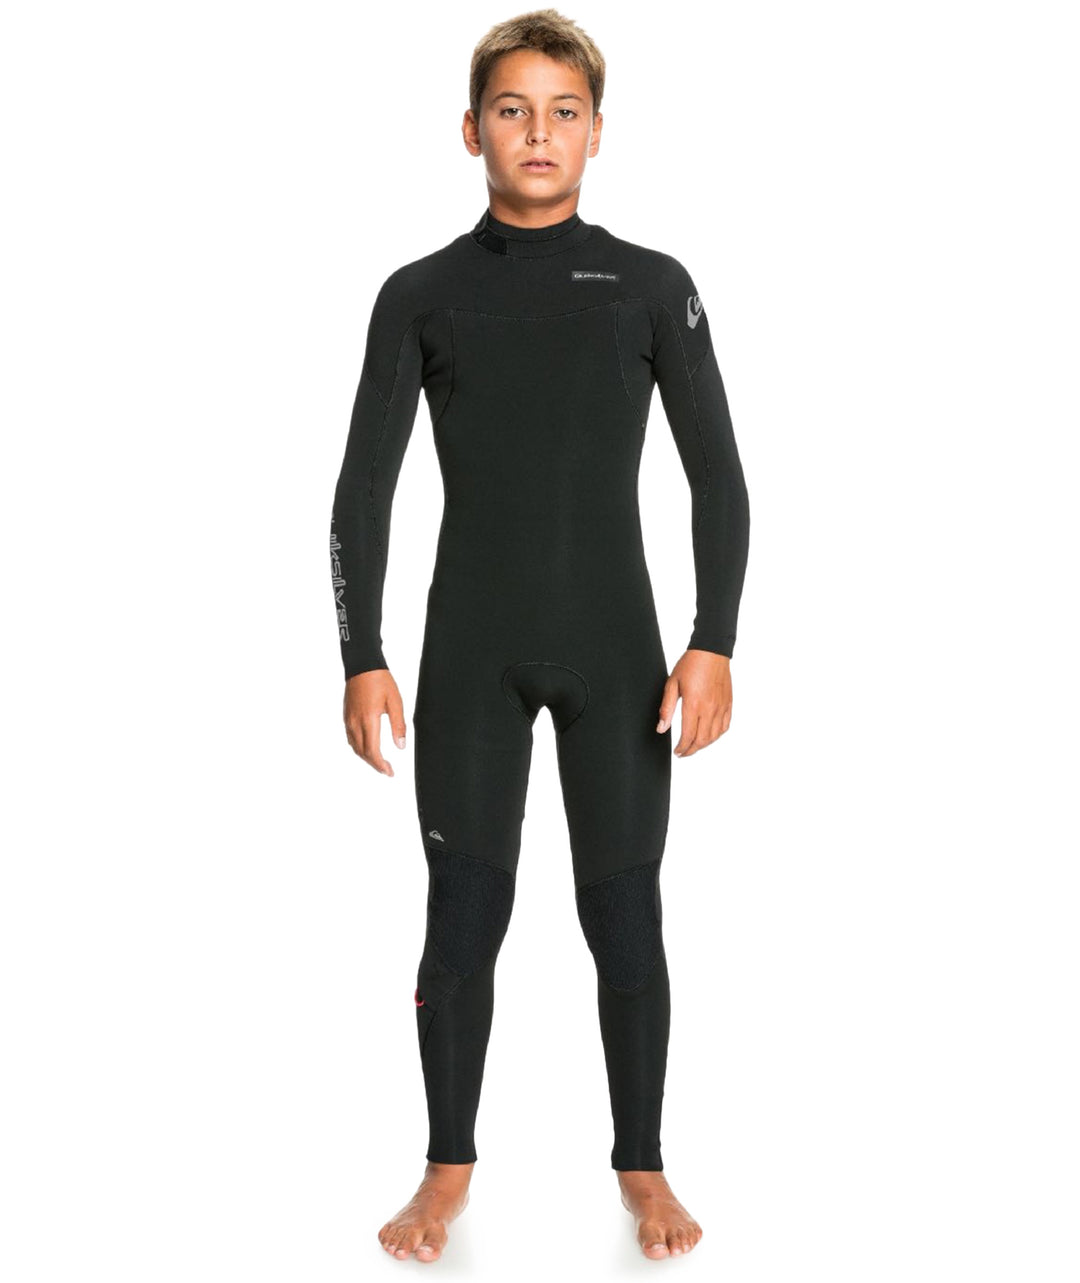 Boys Everyday Sessions 3/2 Back Zip Steamer Wetsuit - Black